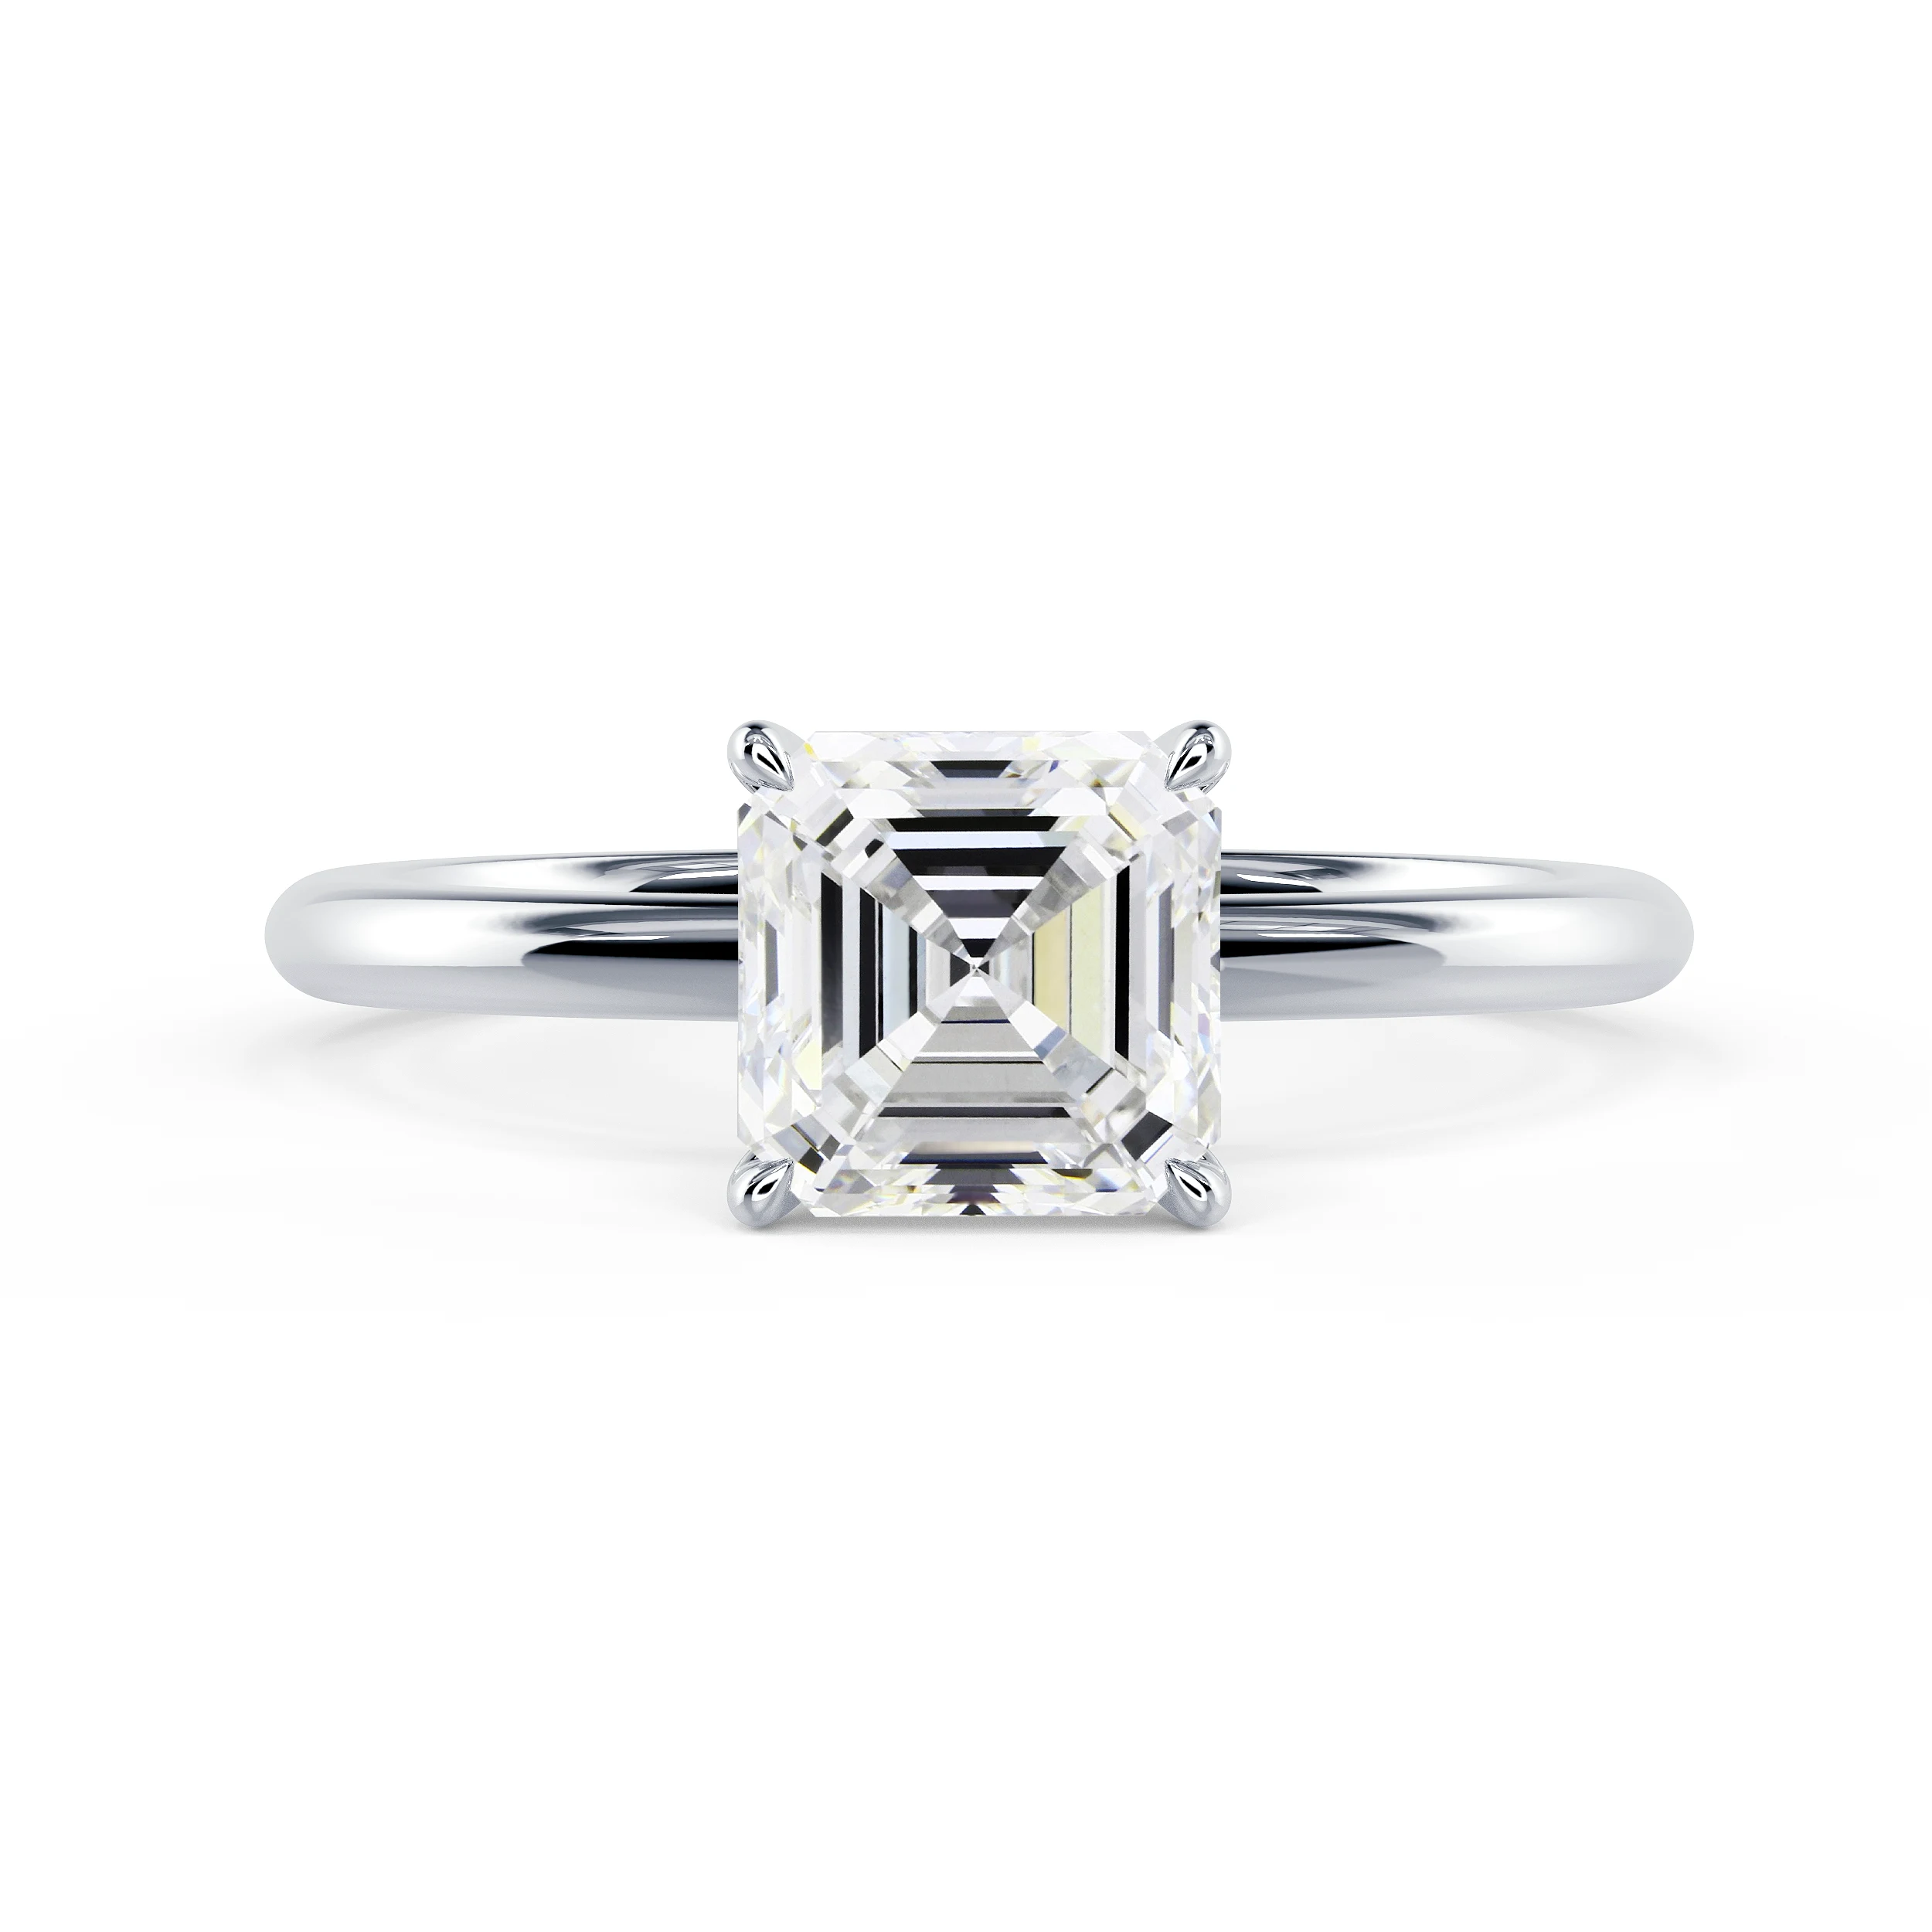 White Gold Asscher Petite Four Prong Solitaire Diamond Engagement Ring featuring Diamonds (Main View)